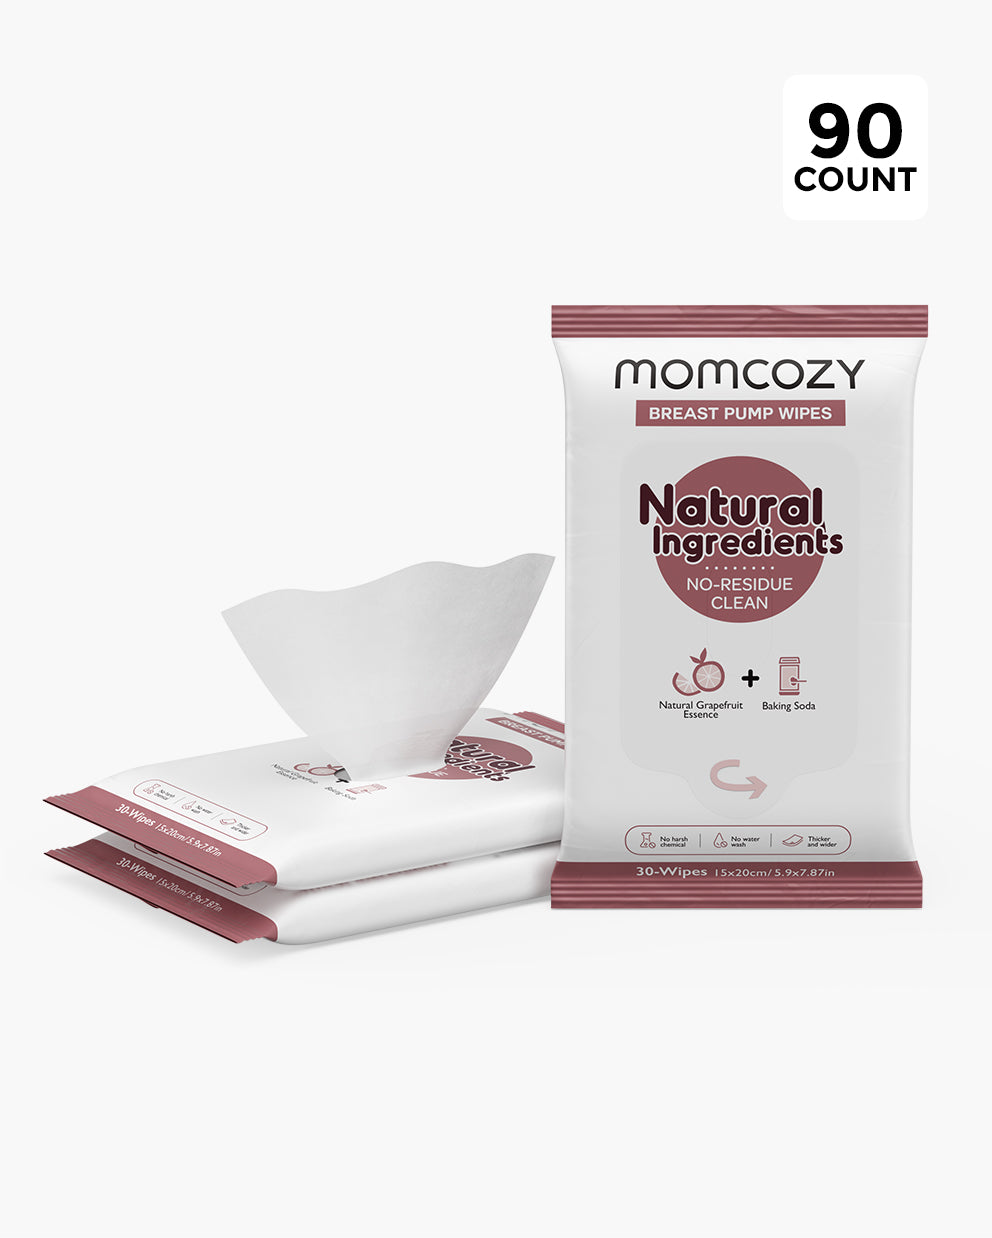 Momcozy - Momcozy breast pump will automatically turn off after 20/30  minutes of using time. So you can use it 3 times with every charge.